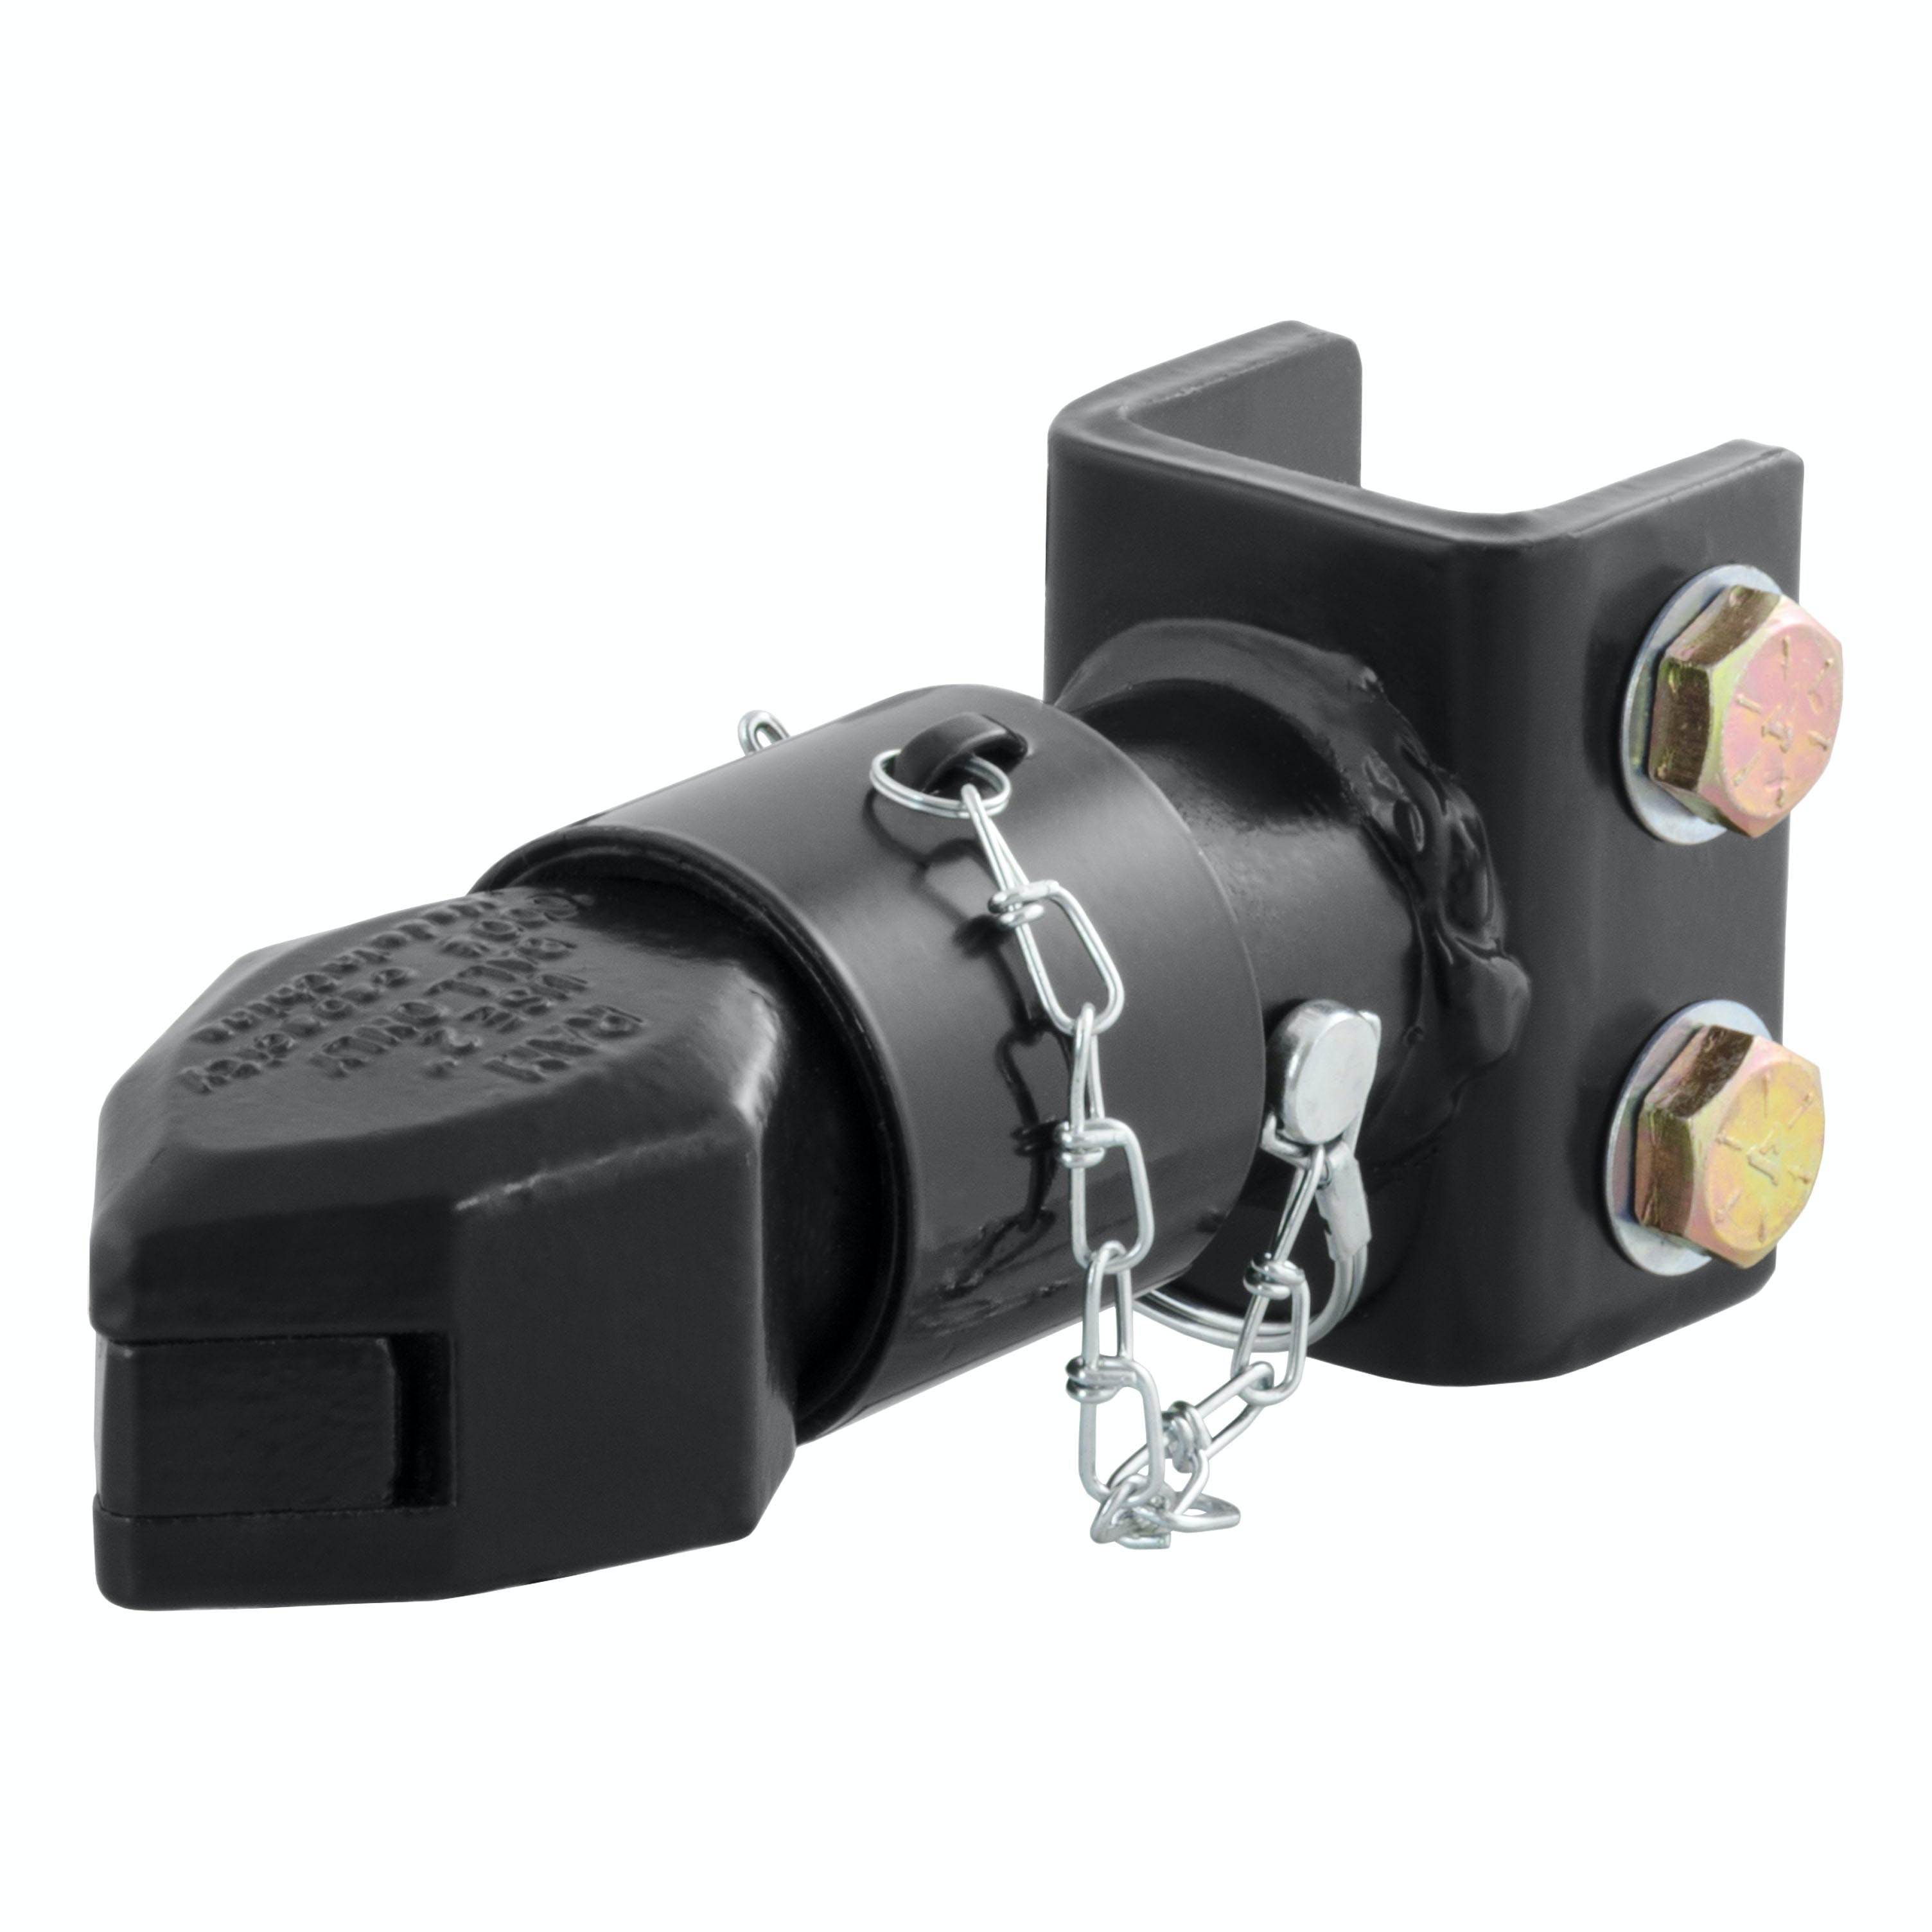 CURT 25319 2 Channel-Mount Coupler with Sleeve-Lock (7,000 lbs, Black)